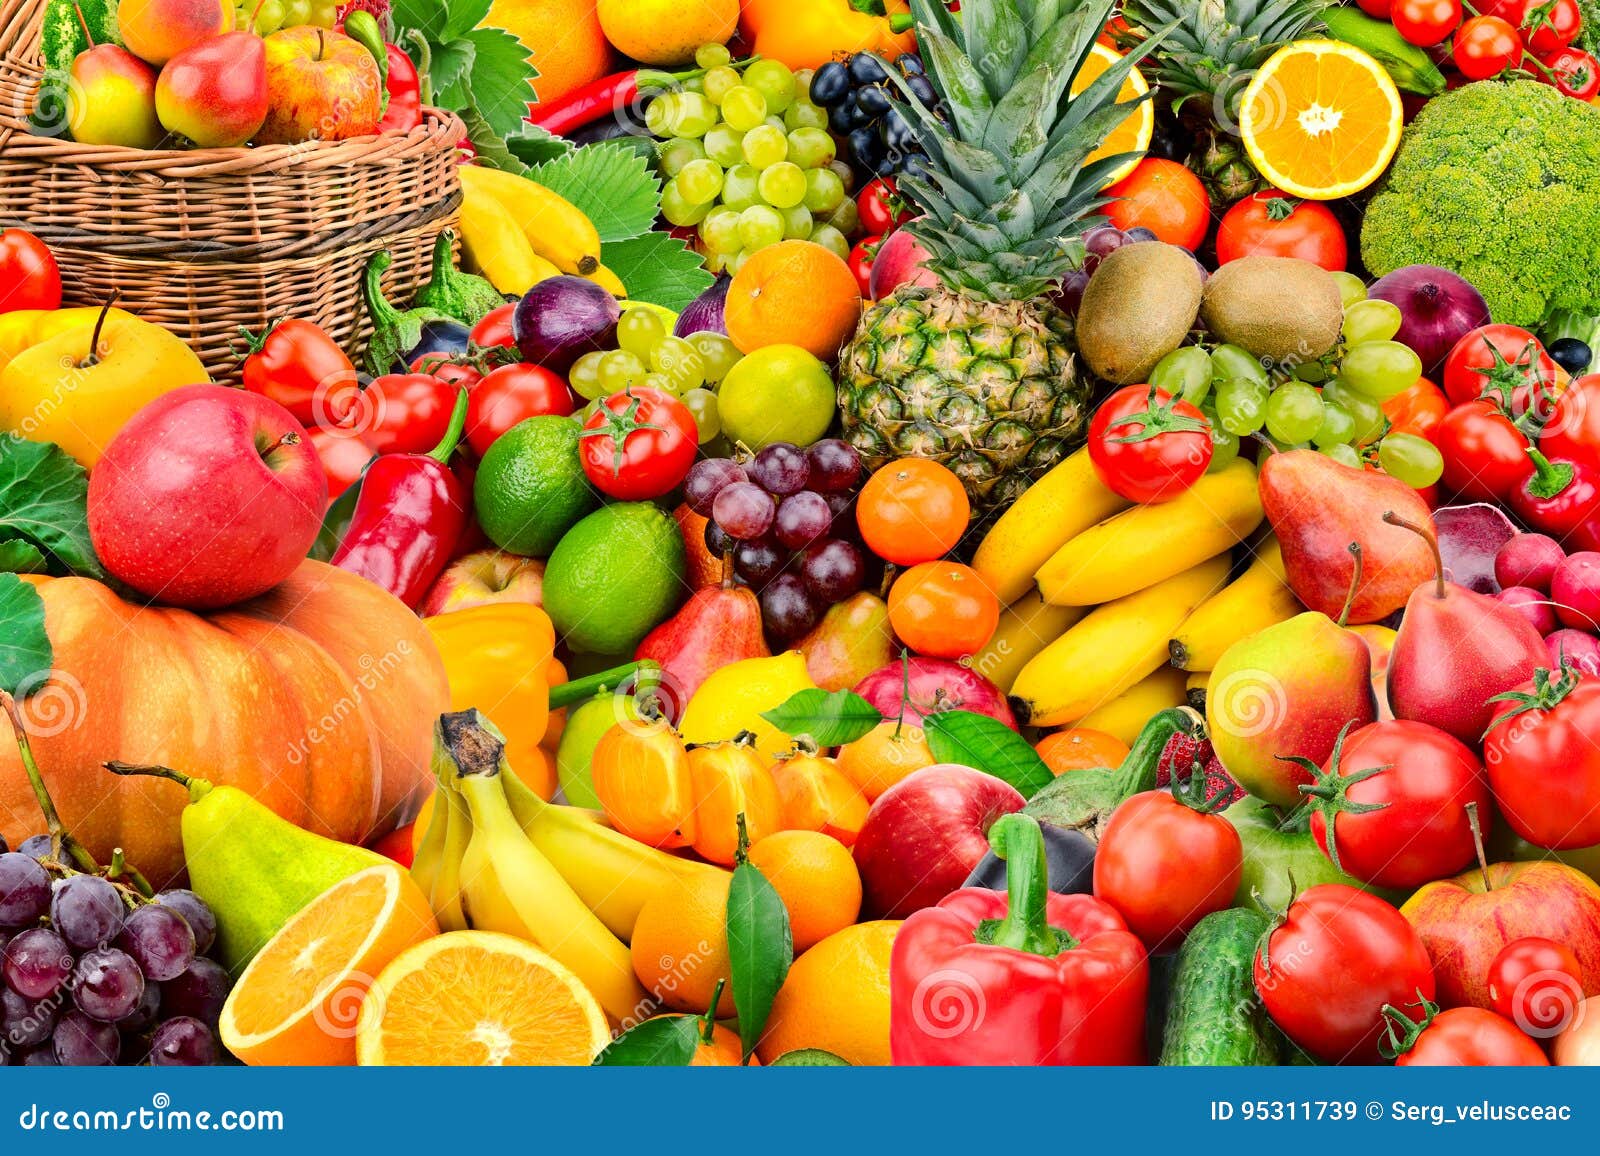 large collection of fruits and vegetables.